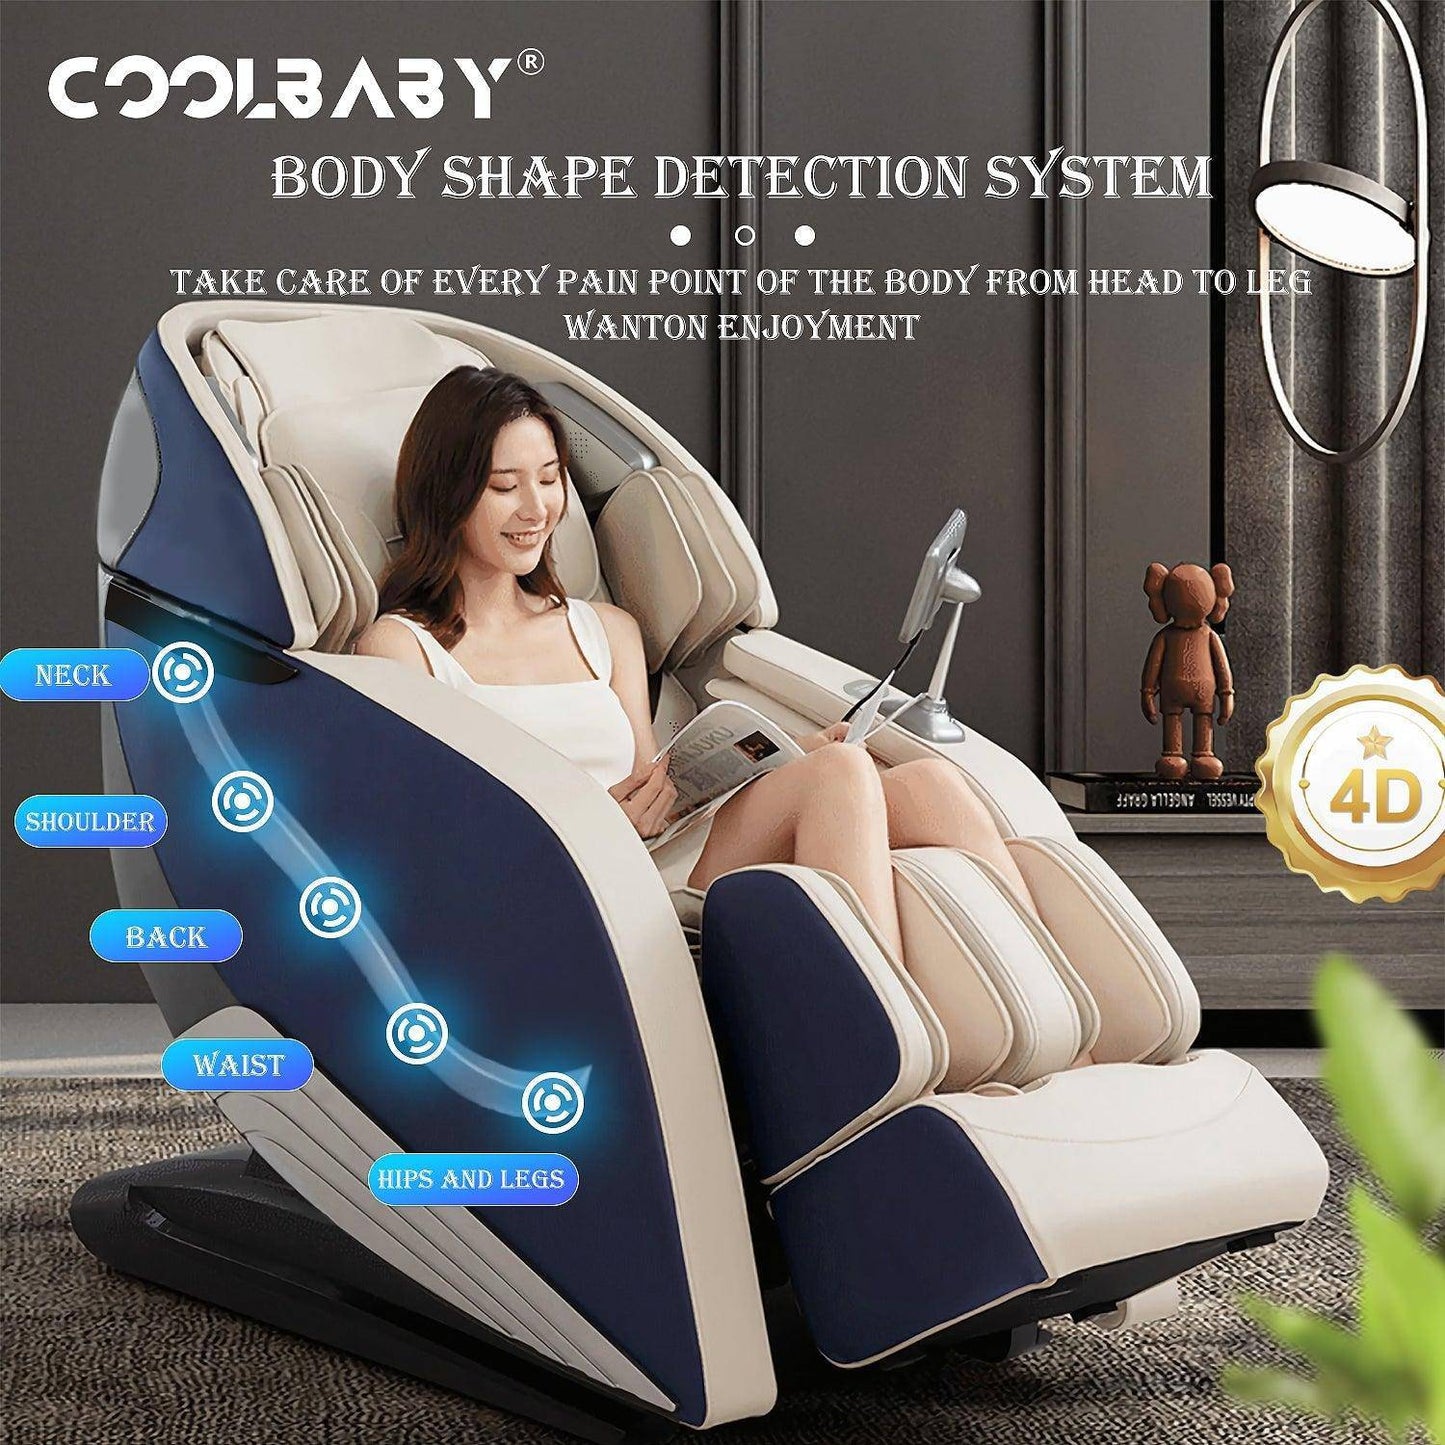 Coolbaby® DDAMY-829 Ultimate Massage Chair - CoolBabyMass